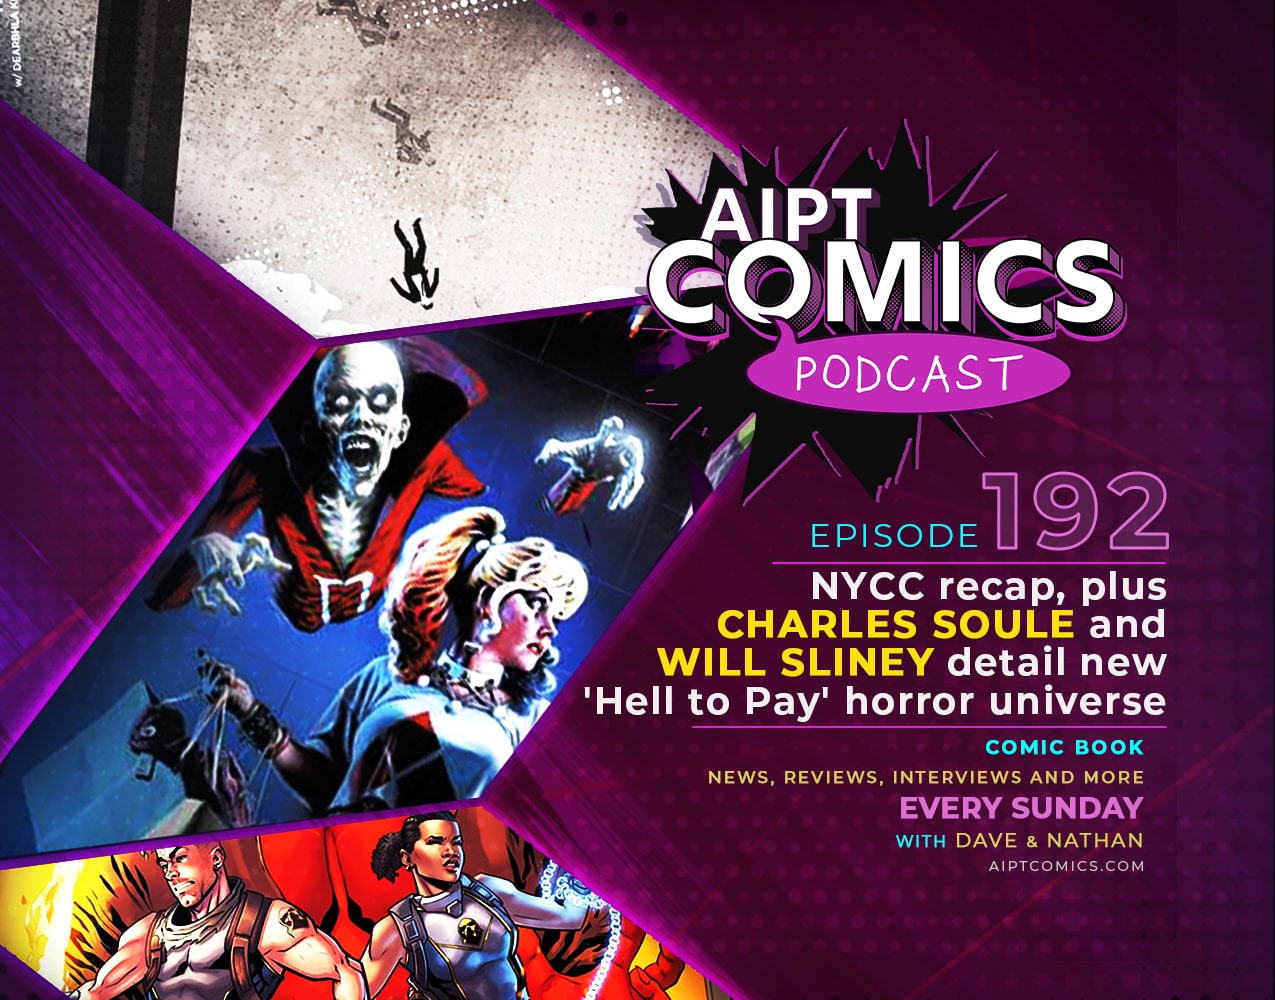 AIPT Comics podcast episode 192: NYCC recap, plus Charles Soule and Will Sliney detail 'Hell to Pay' horror universe